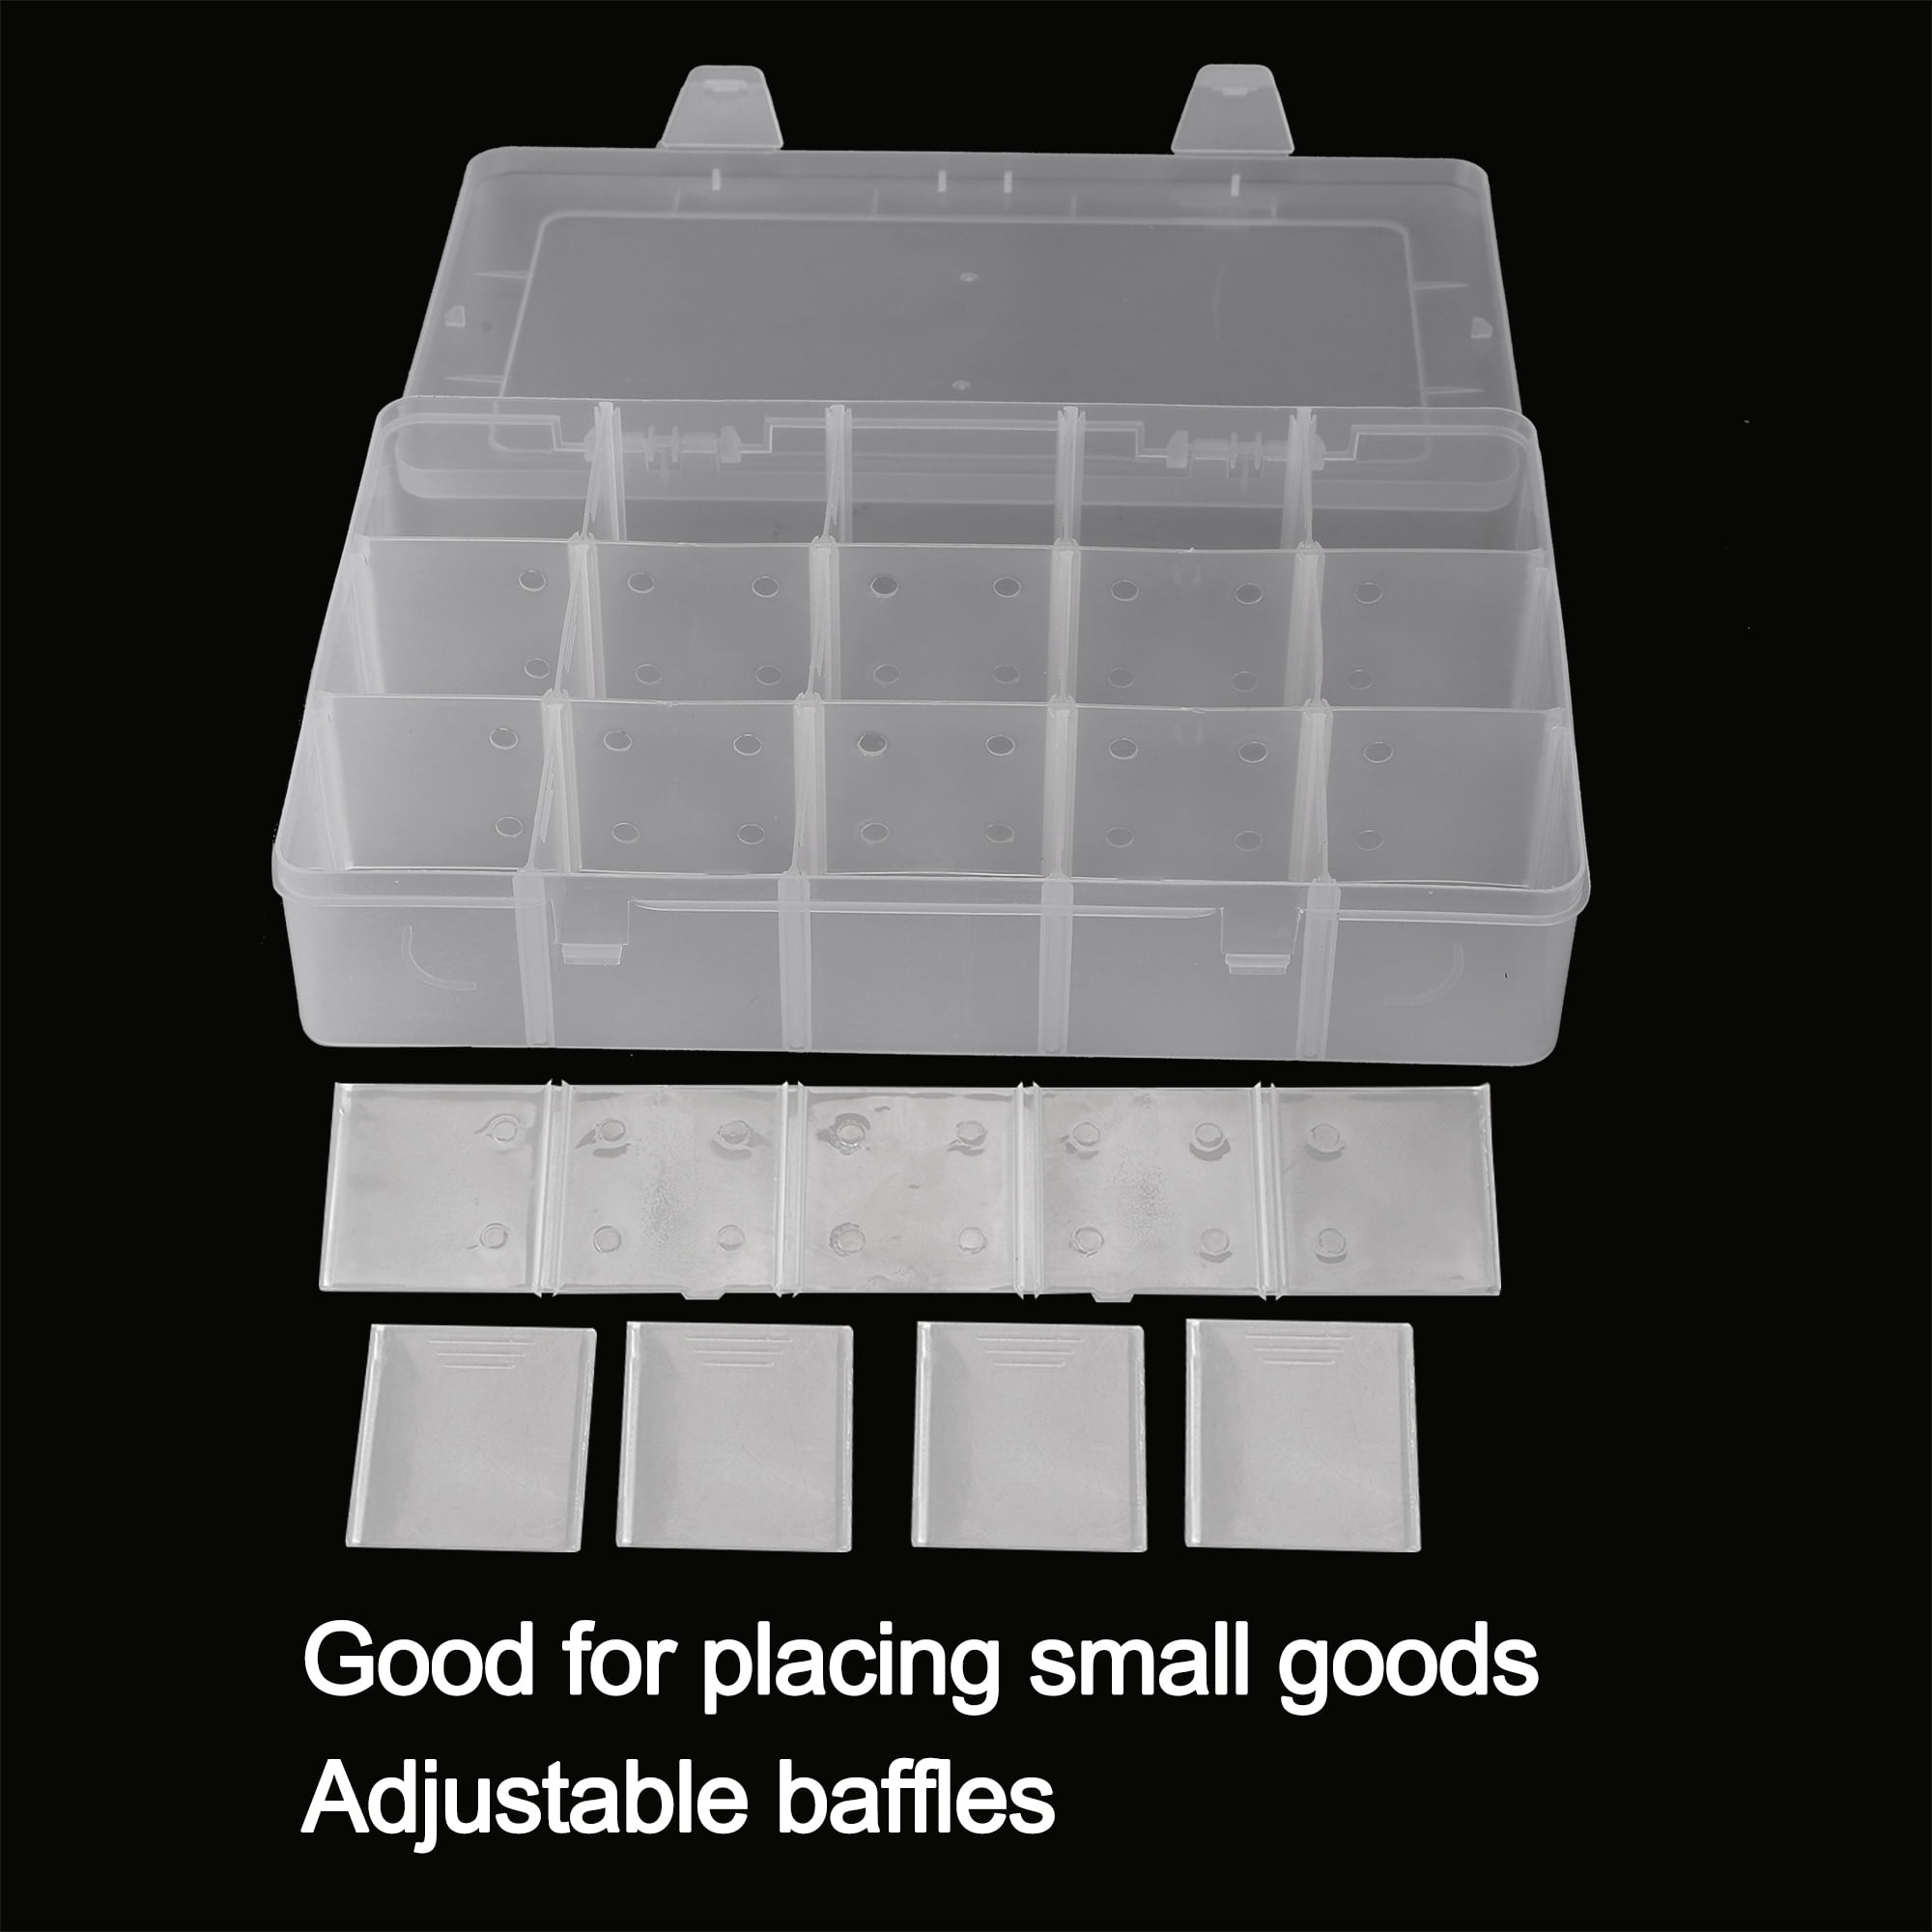 Plastic Grid Storage Box 15 Grids Clear Storage Transparent Container  Compartment Box with Removeable Dividers